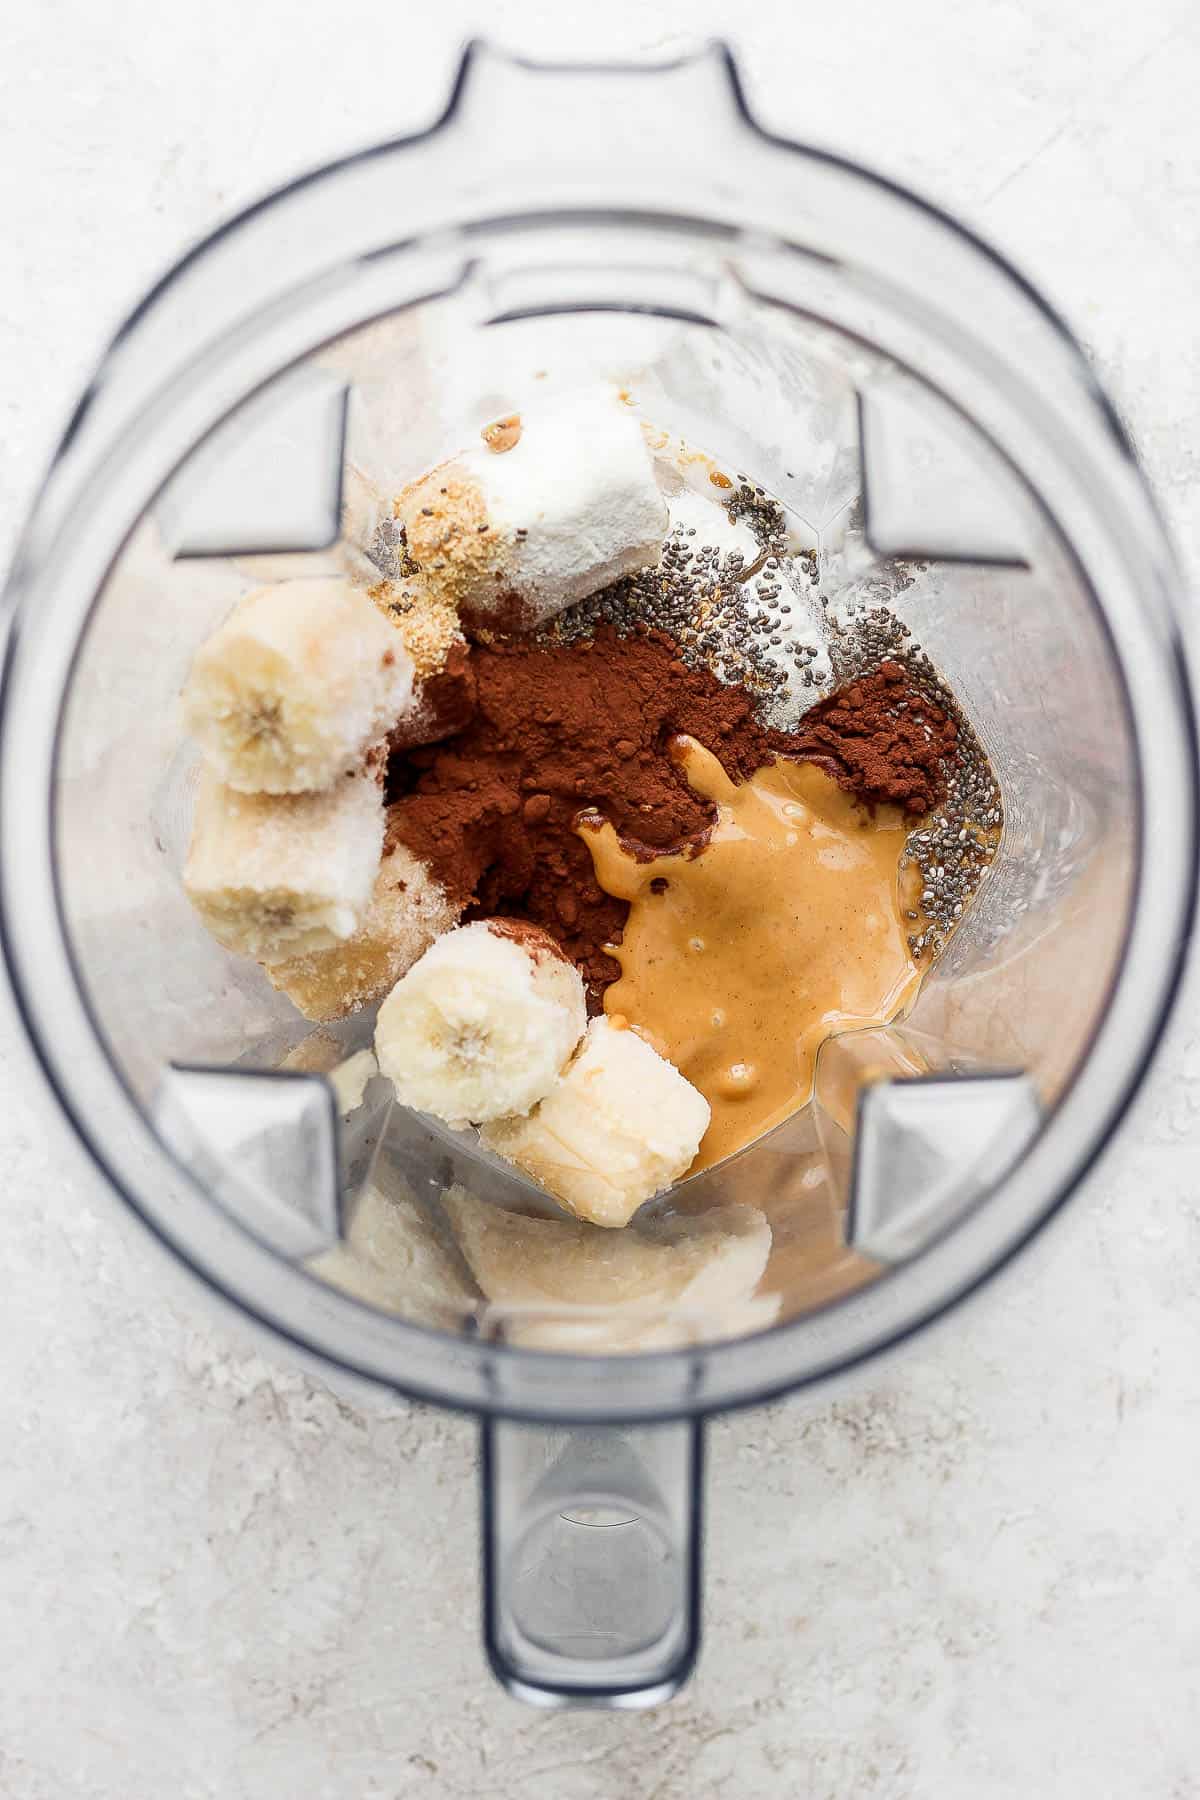 All of the ingredients in a high powdered blender.